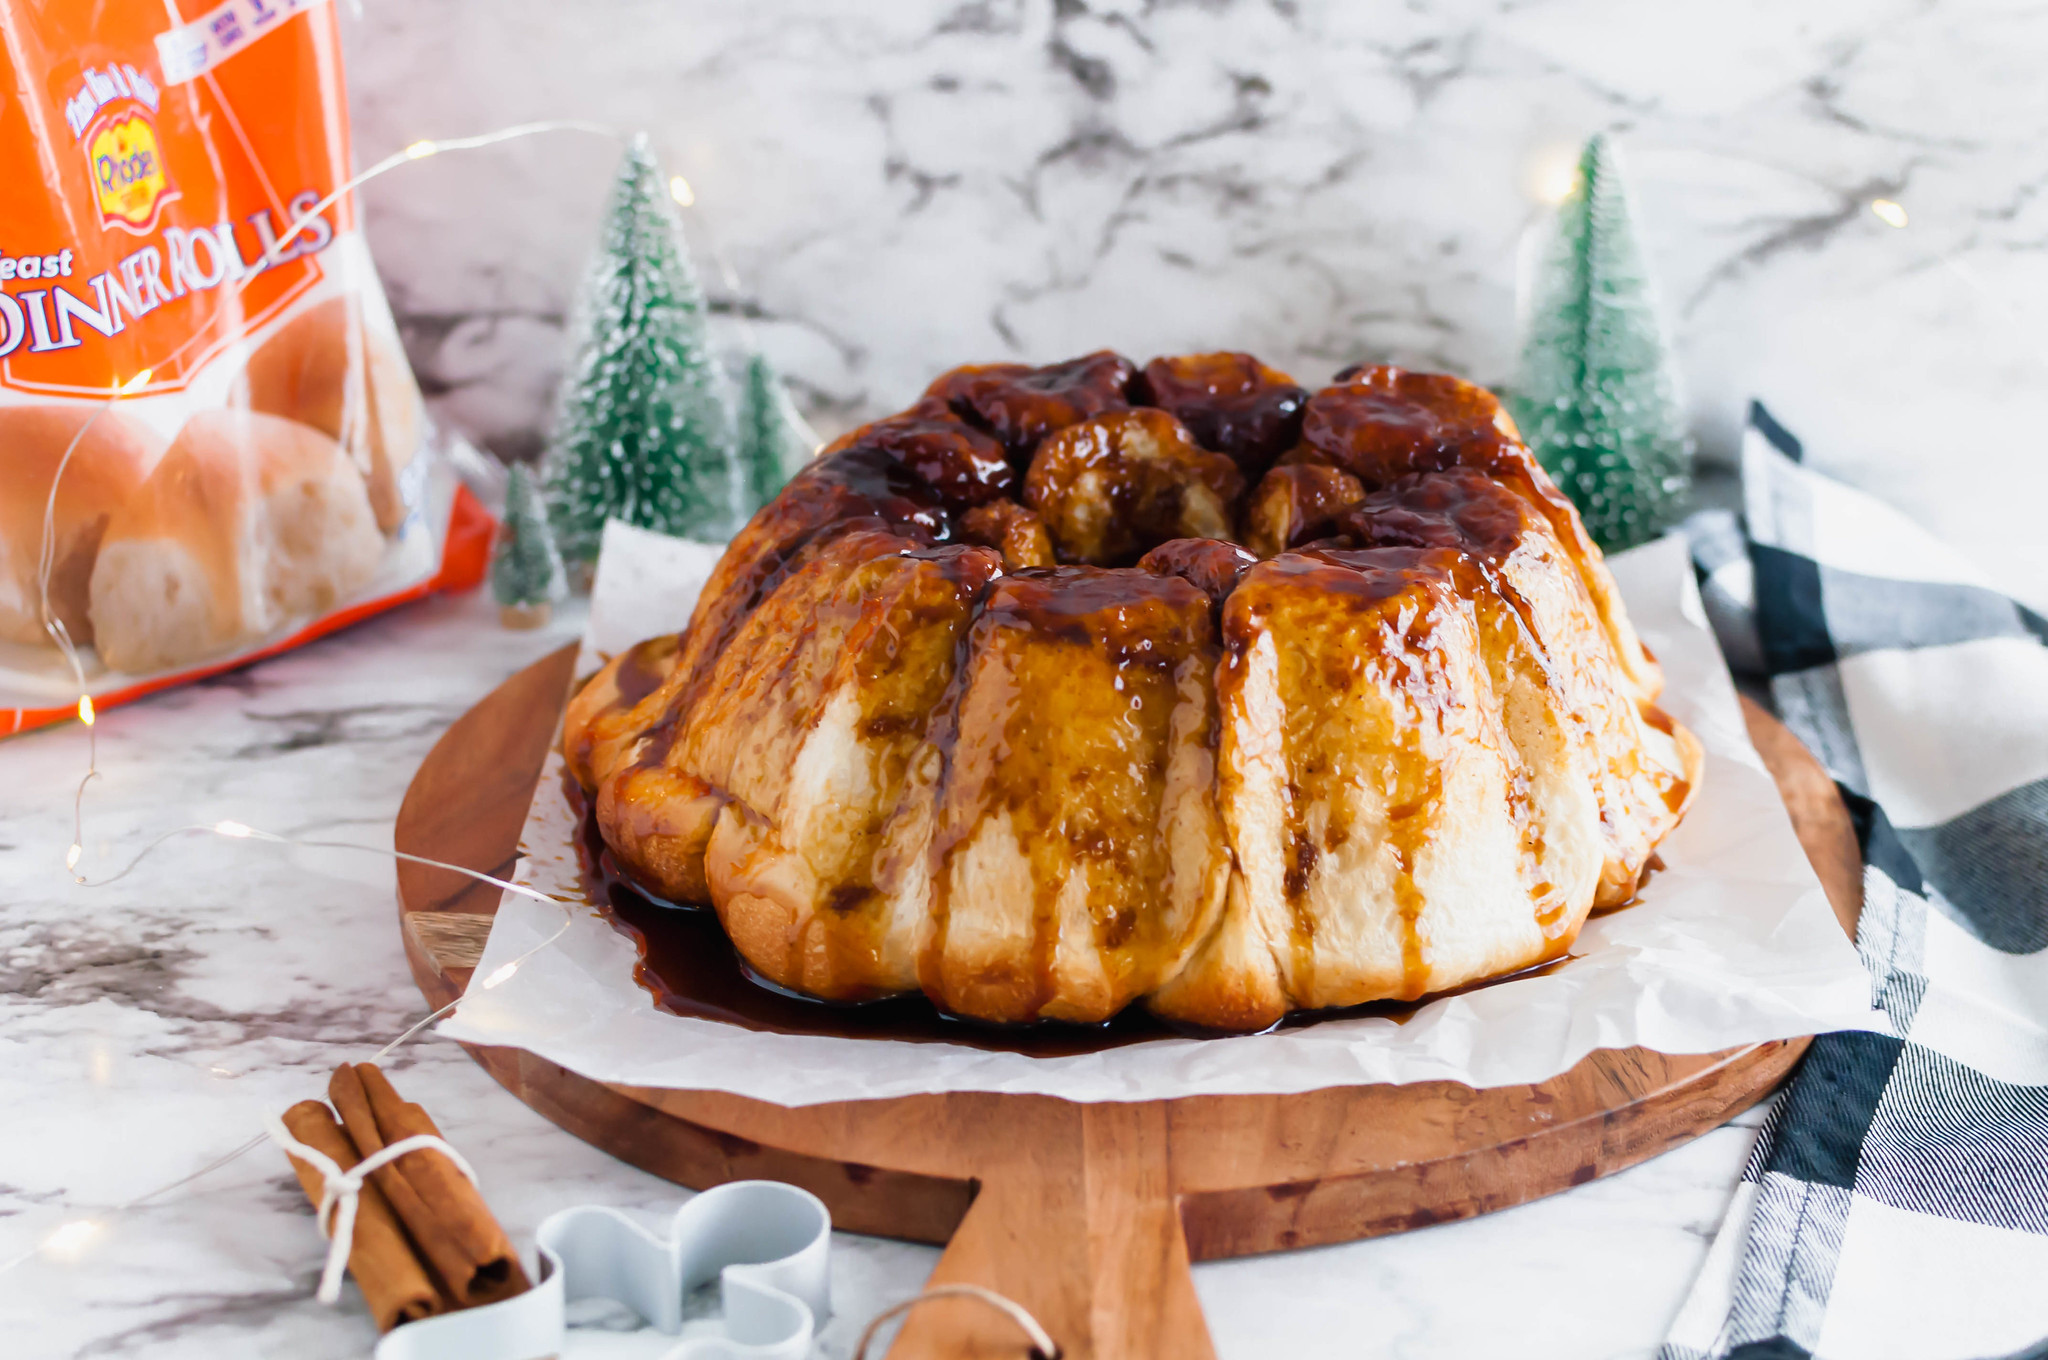 Make your holiday mornings even sweeter with this make ahead Gingerbread Monkey Bread. Prepare the night before and bake Christmas morning. It's filled with so much holiday flavor.